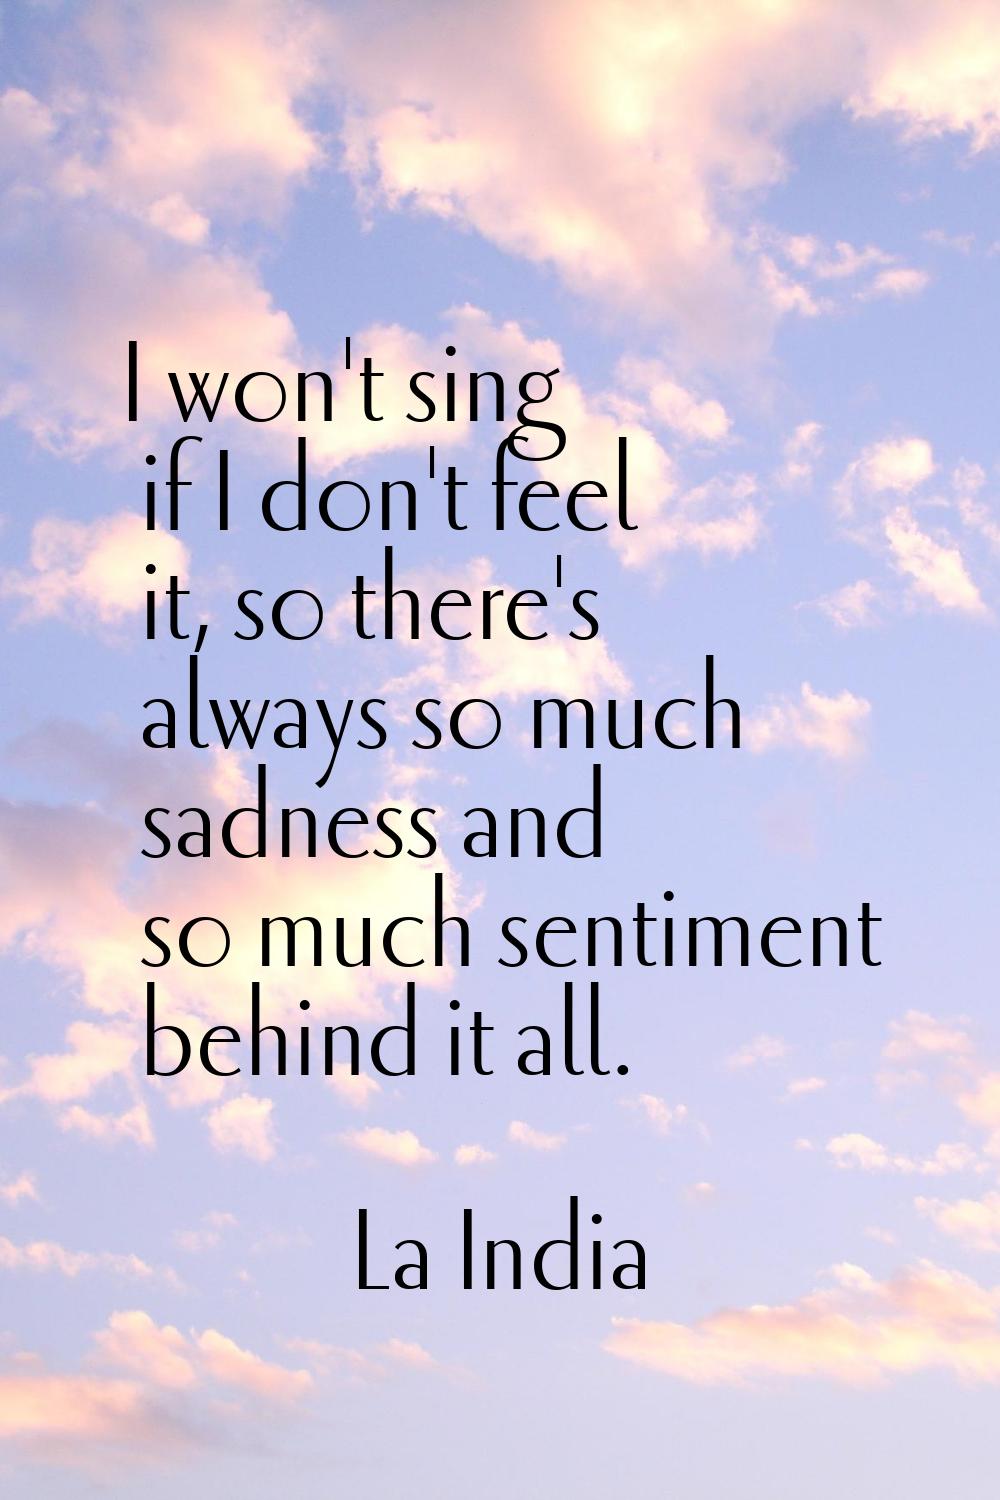 I won't sing if I don't feel it, so there's always so much sadness and so much sentiment behind it 